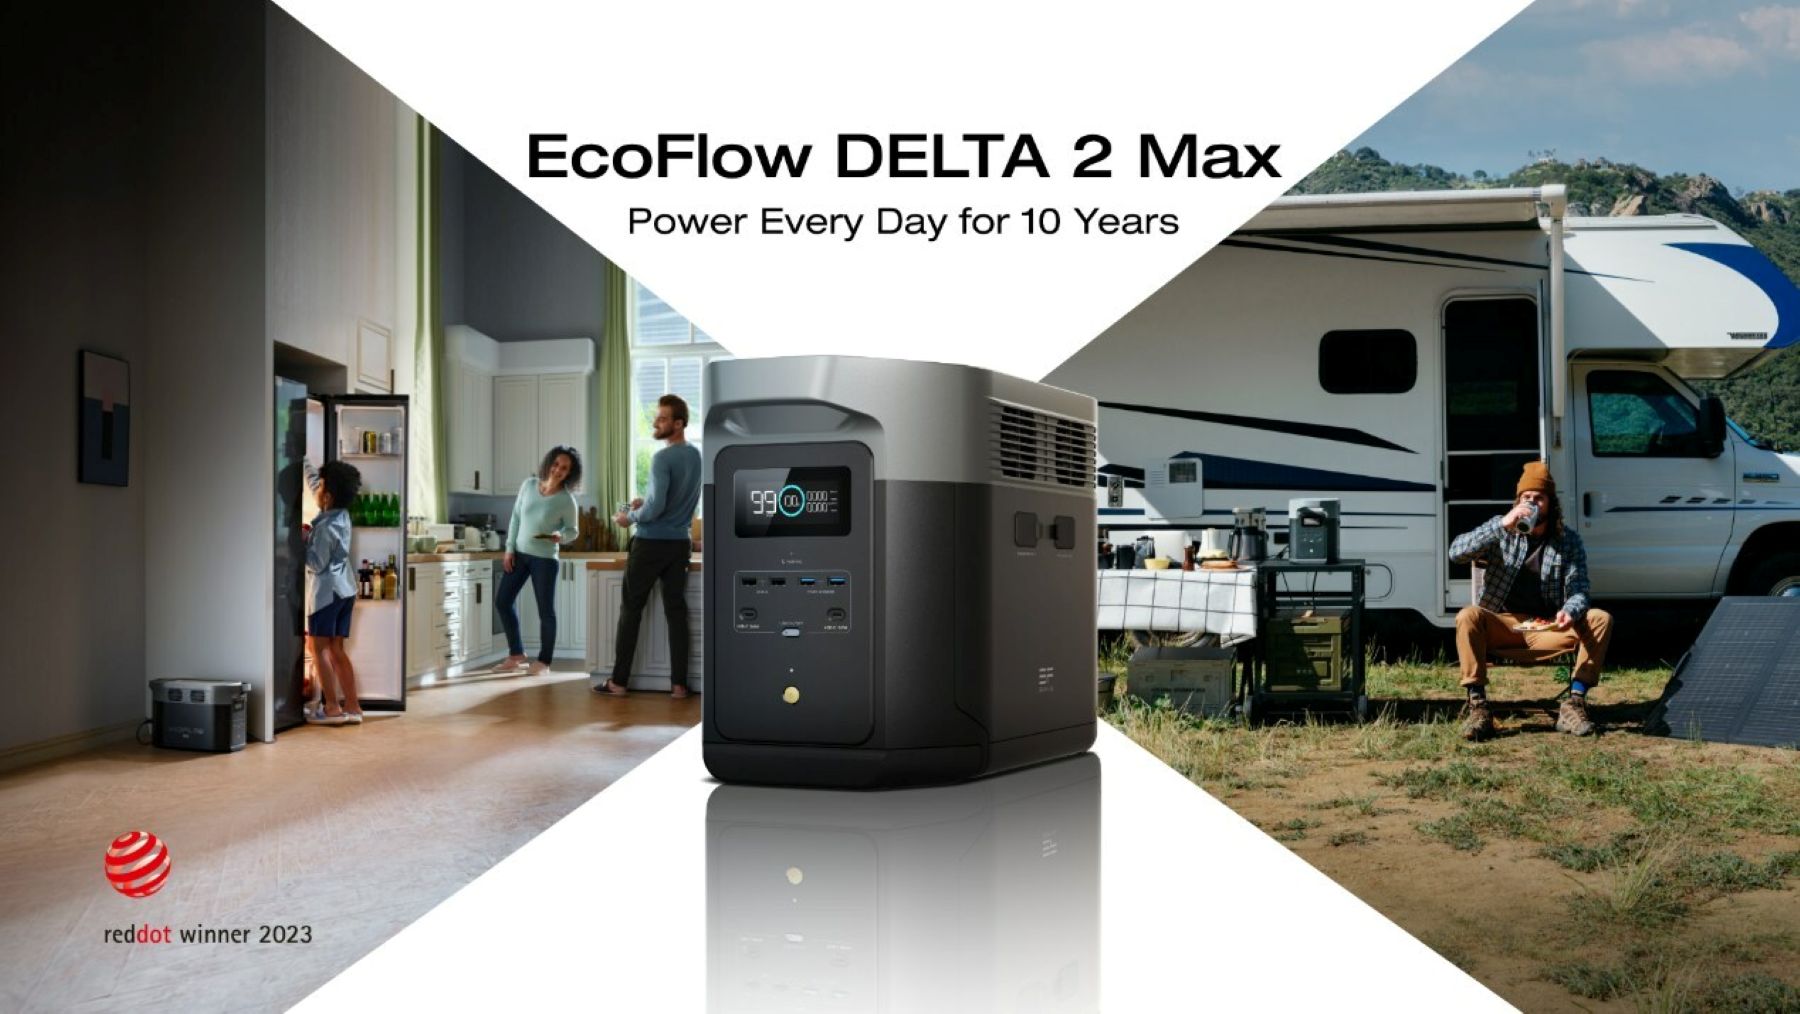 EcoFlow Launched DELTA 2 Max – The Ultimate Portable Power Station to Power Every Day for 10 Years